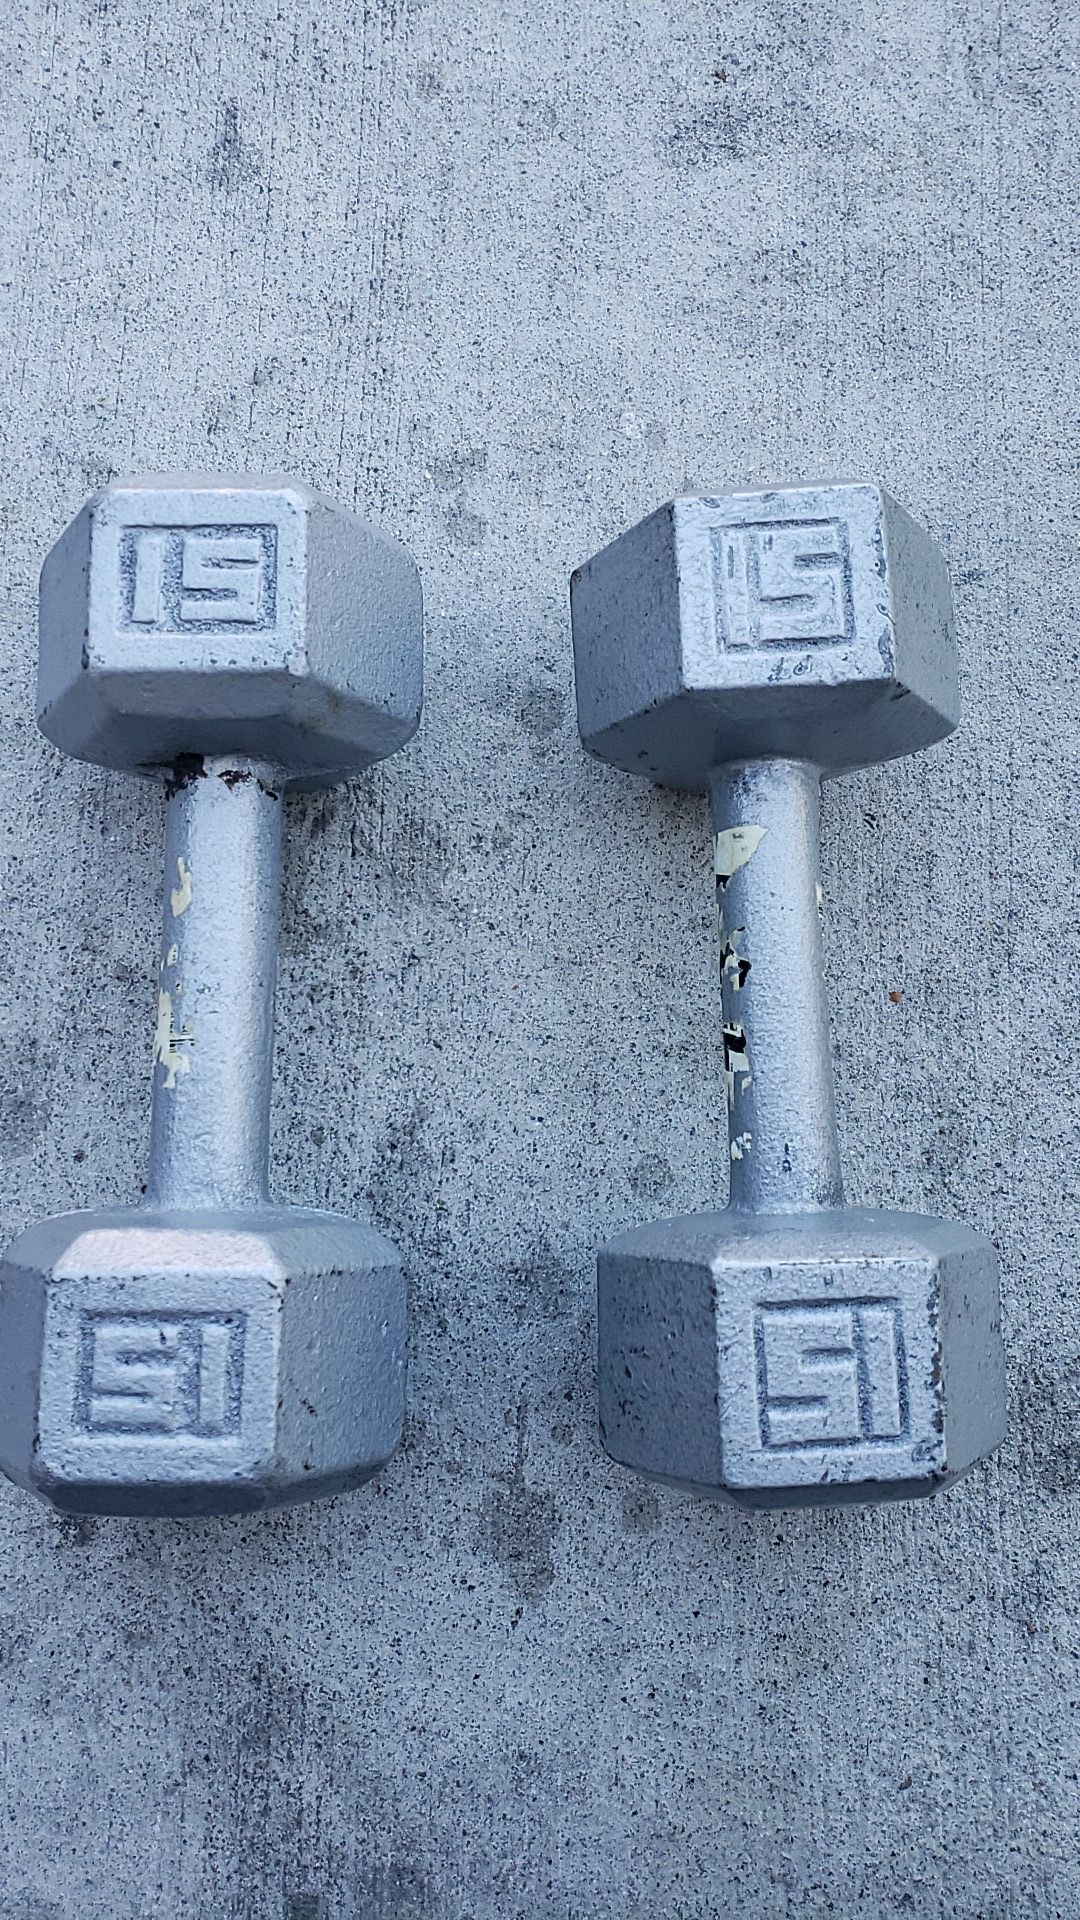 15 lbs dumbbells 2 for $ 20